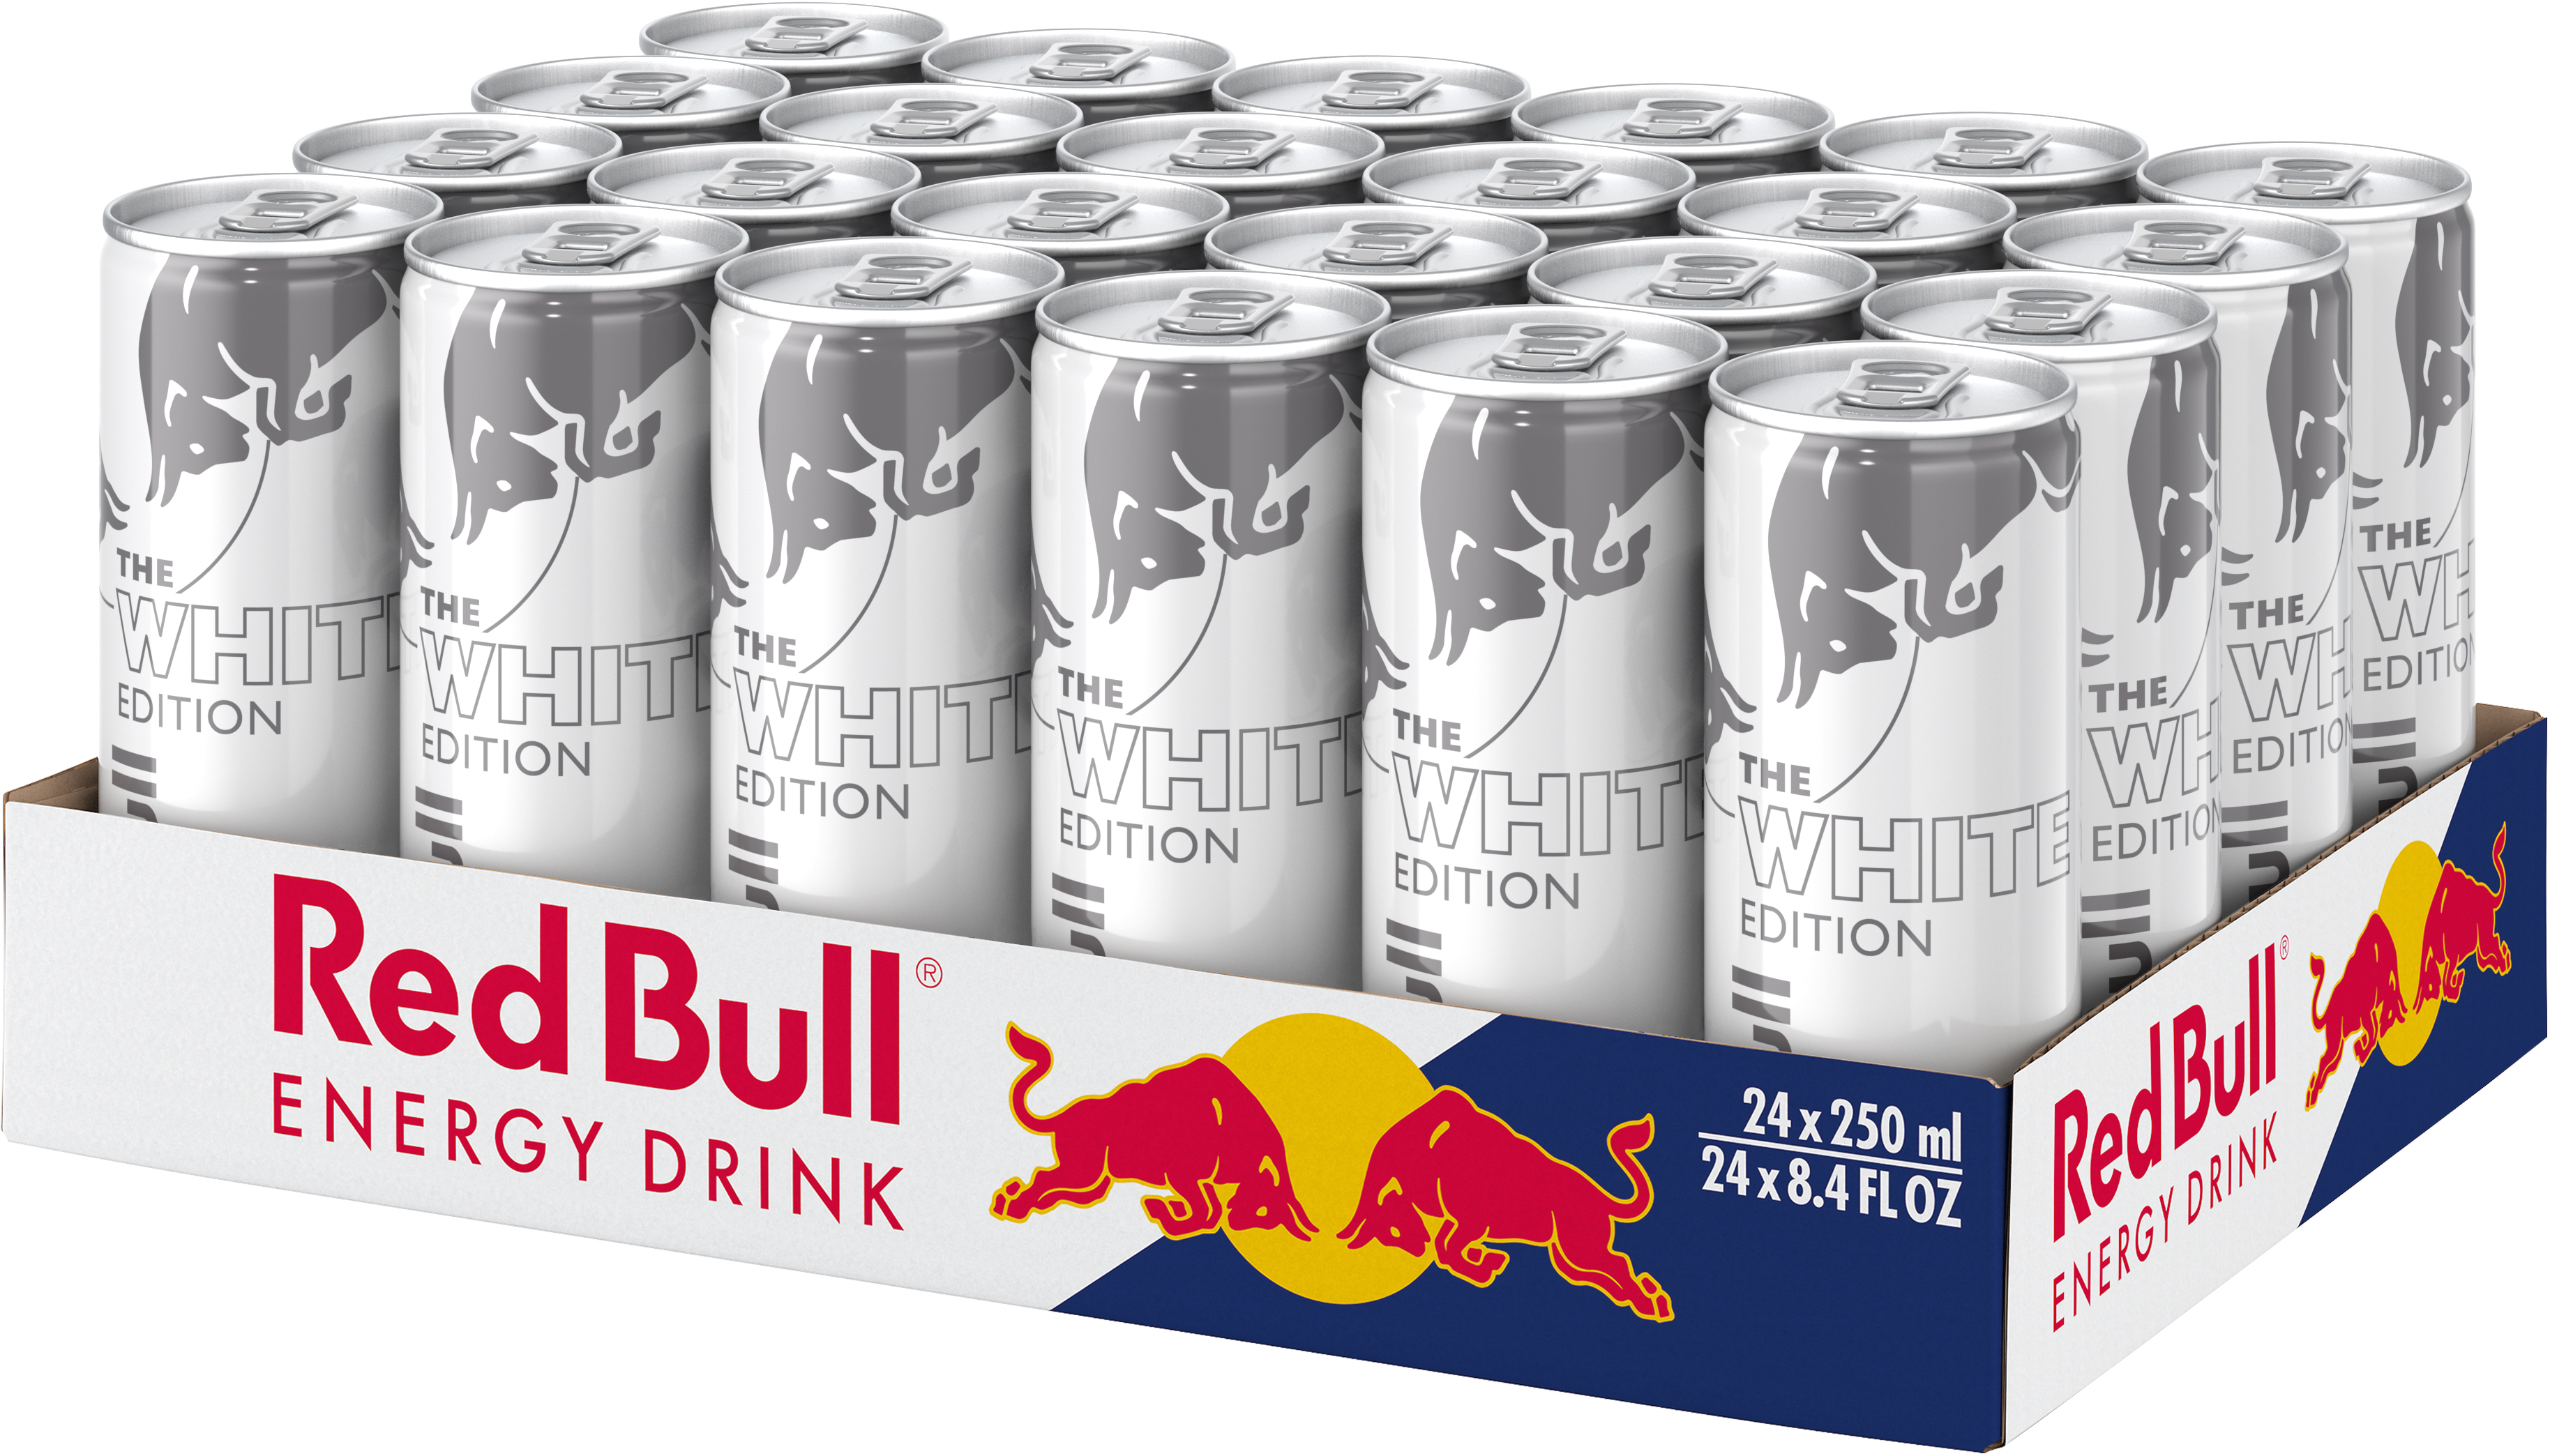 RED BULL Energy Drink Alu 4255 White Edition 25 cl, 24 pcs.